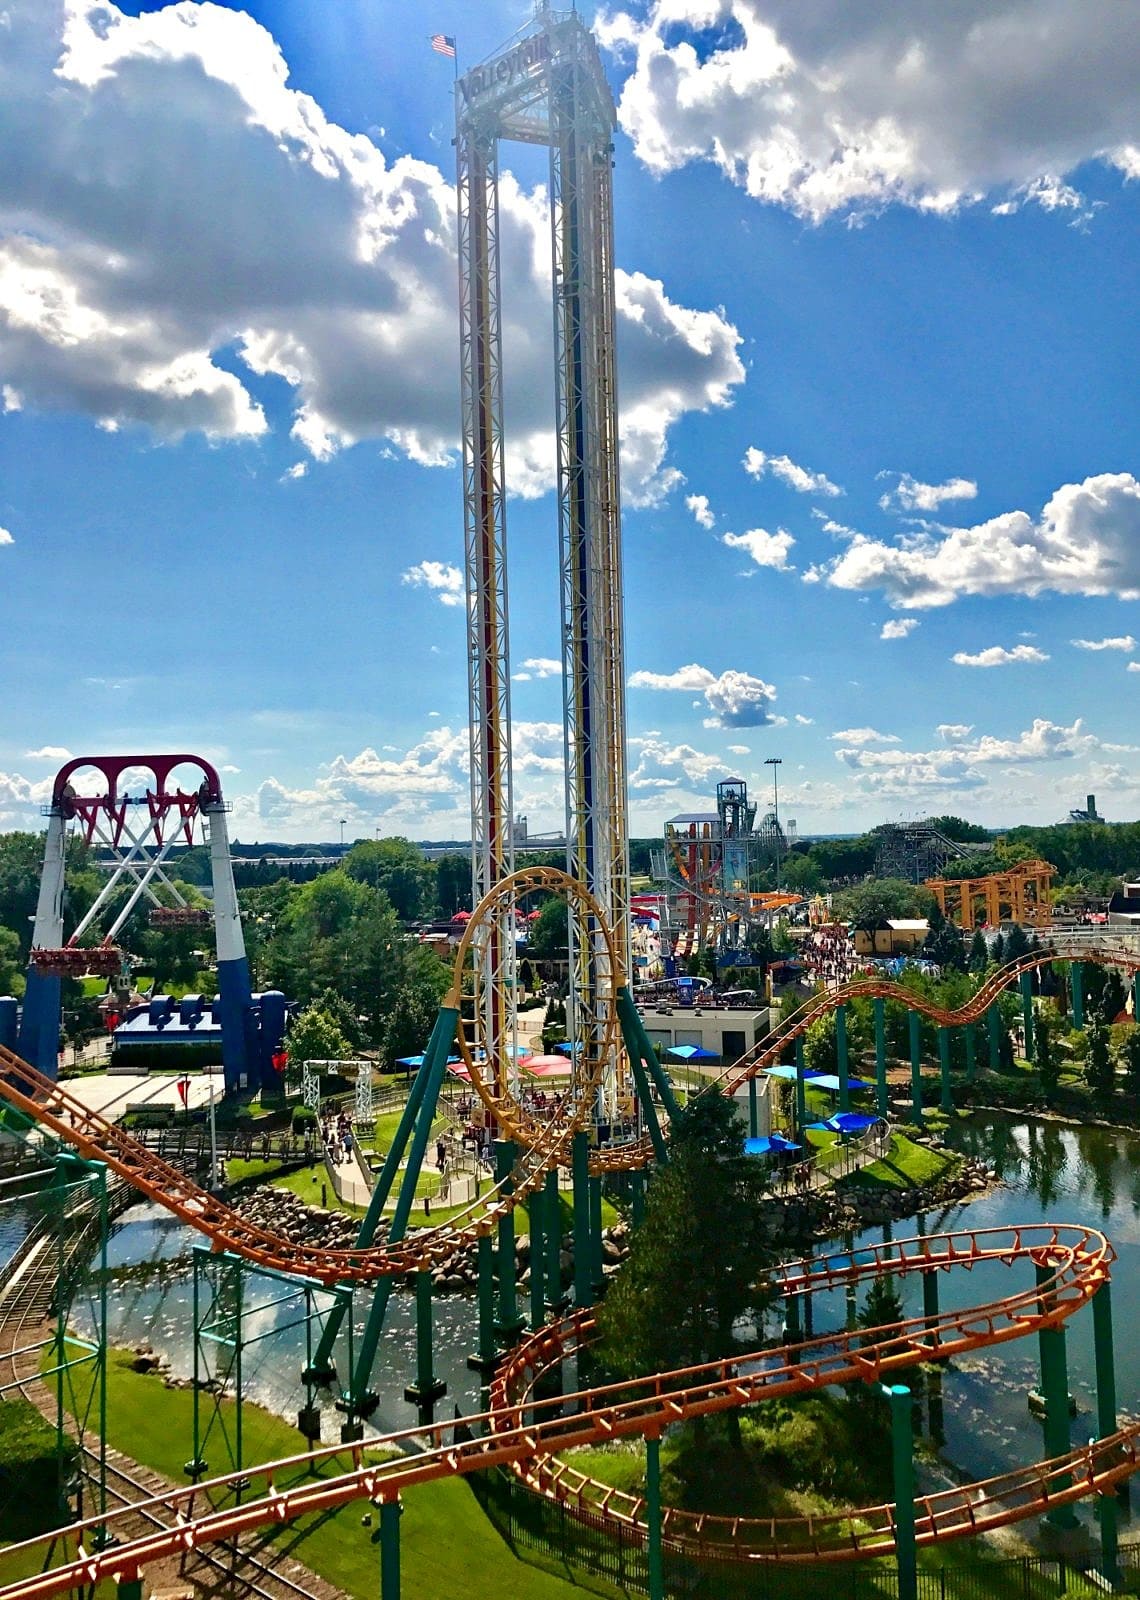 There are 44 rides at Valleyfair ~ Minnesota's largest theme park